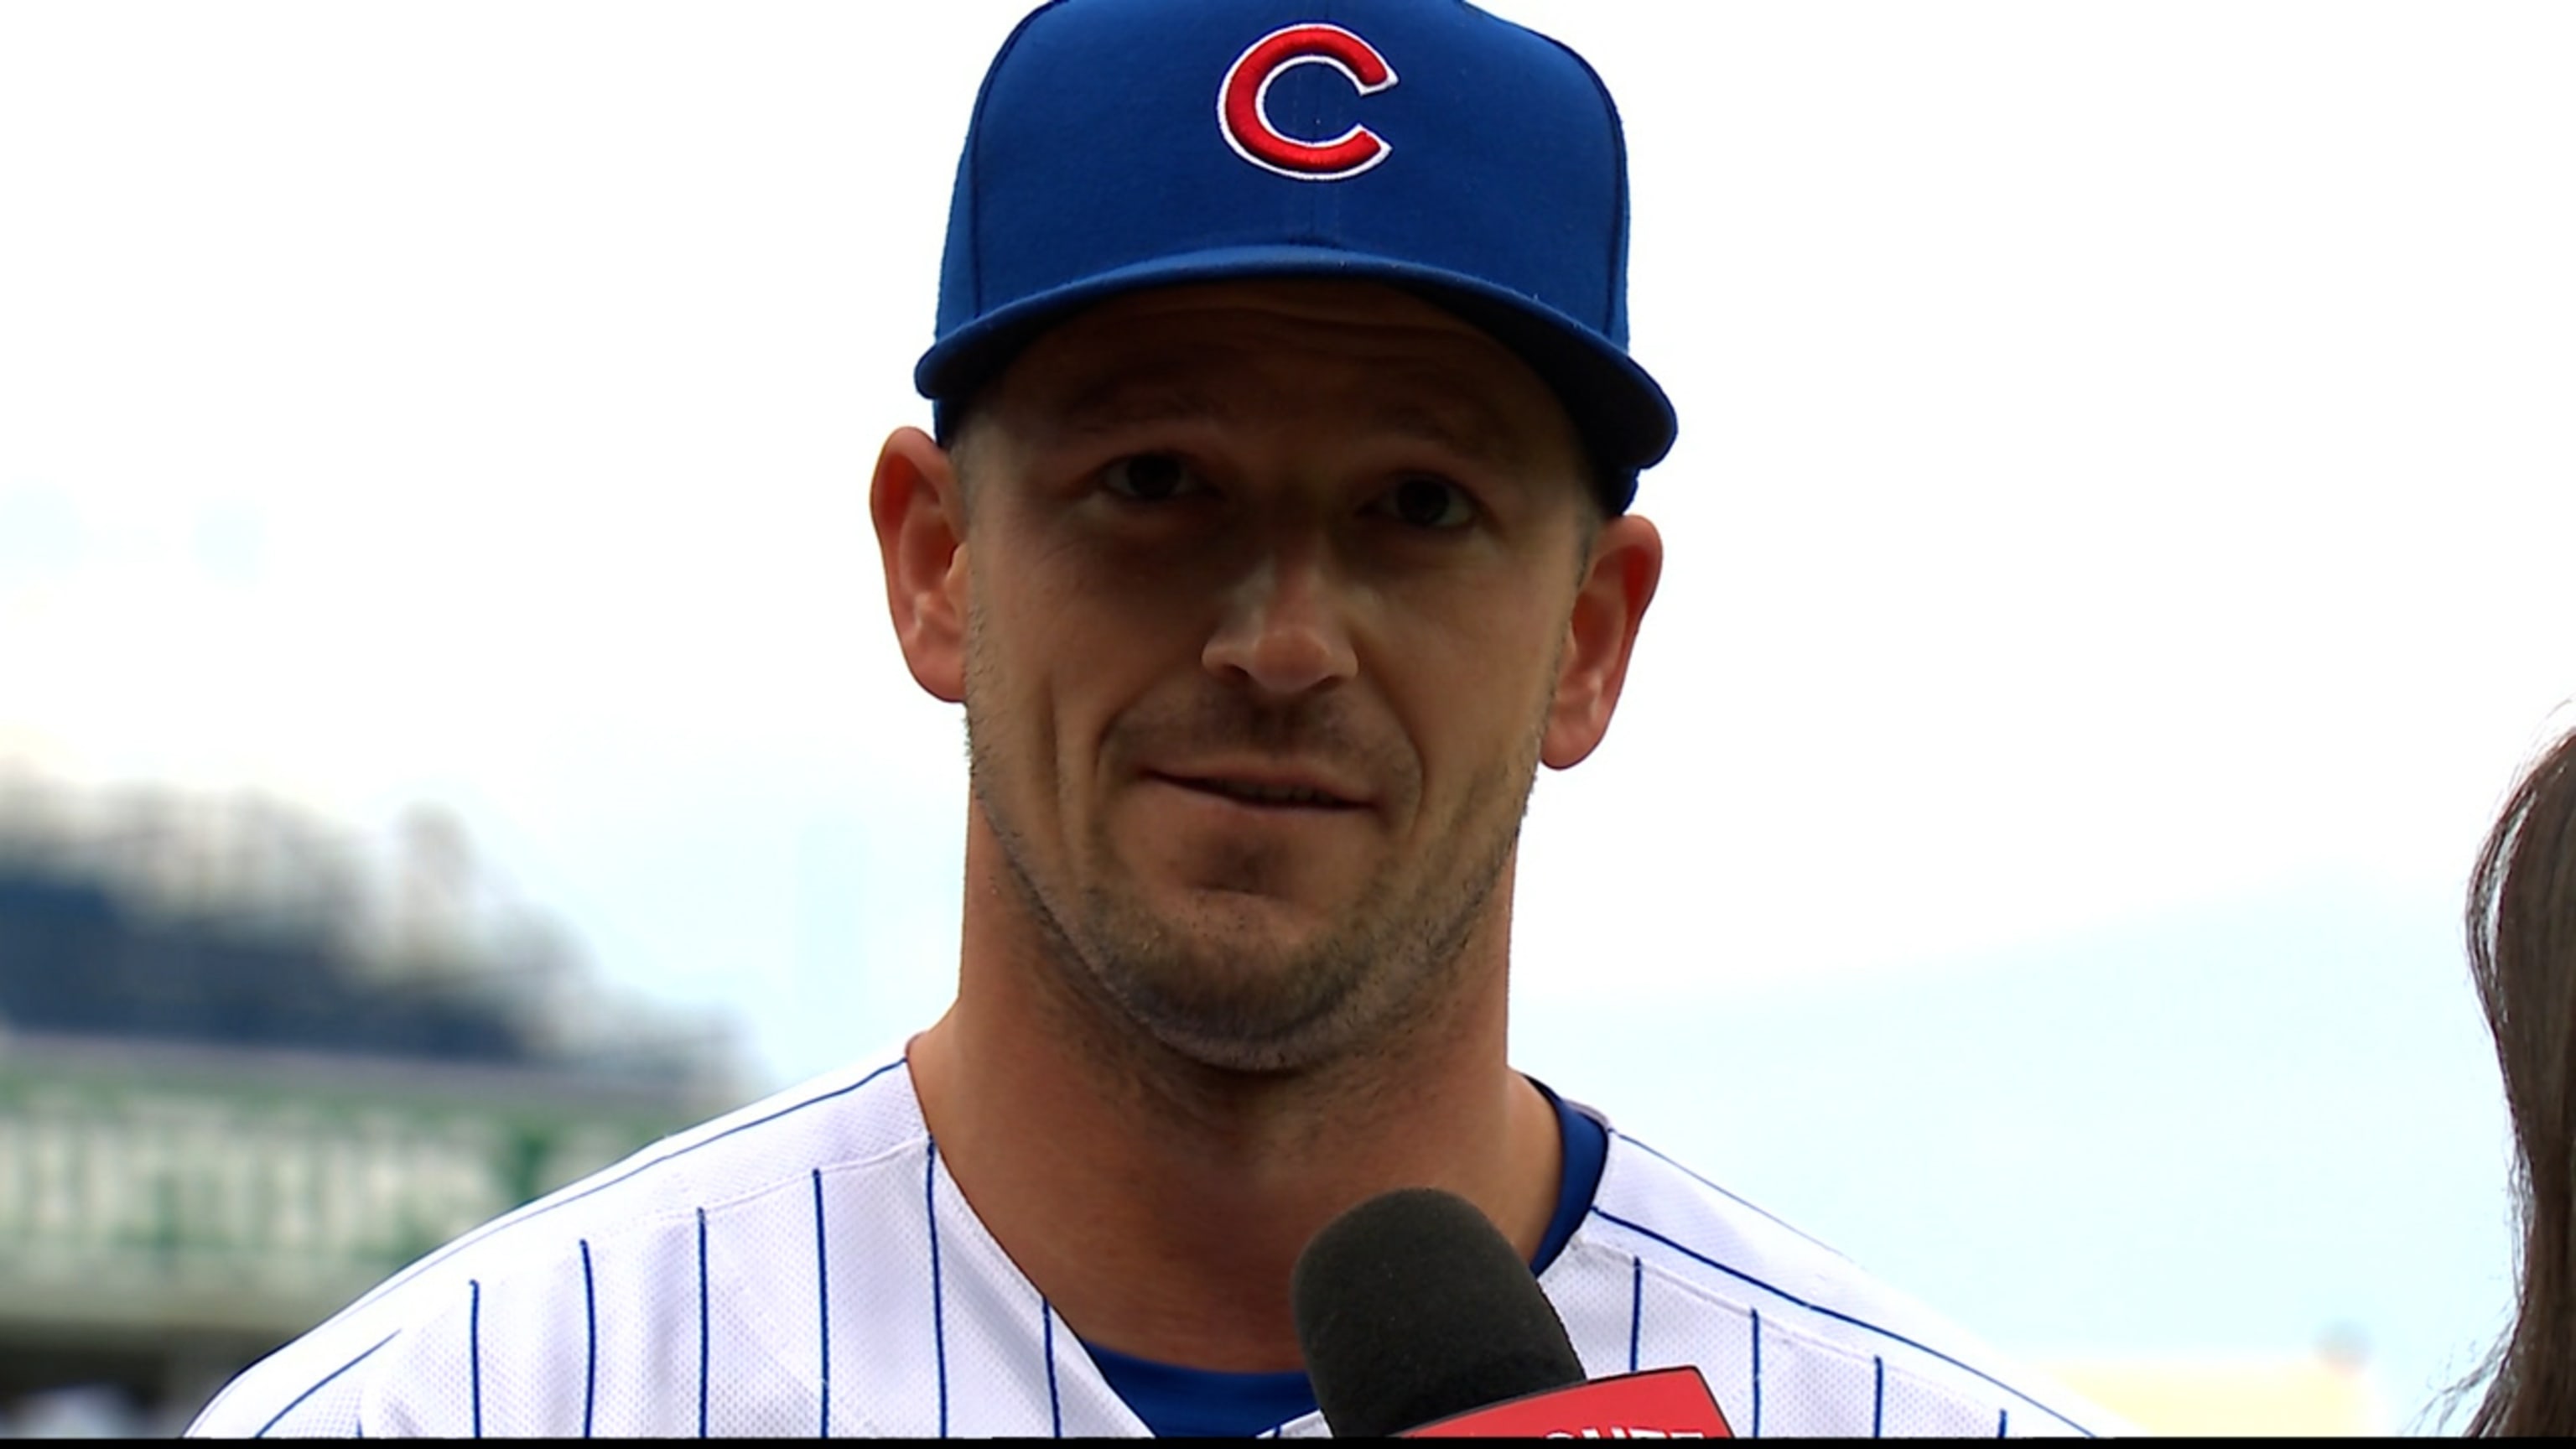 Lee] Today's Cubs warmup shirts feature Yan Gomes tackling Drew Smyly and a  postgame quote from David Ross. : r/baseball